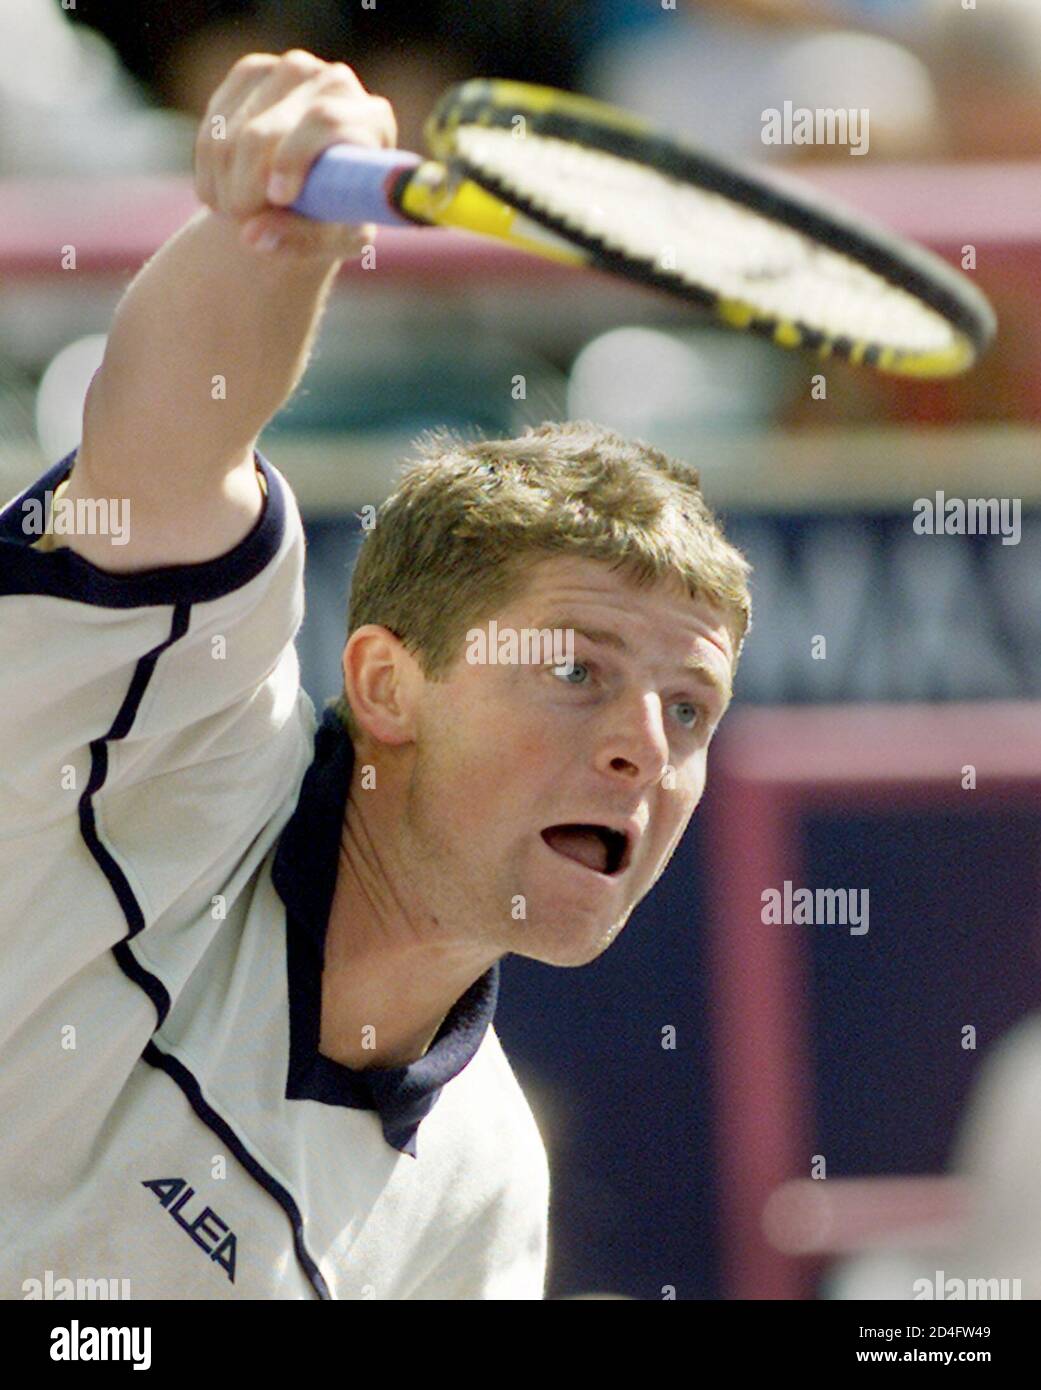 Jiri Novak of the Czech Republic serves during his quarter final win over  Australia's Pat Rafter at the Tennis Masters Series-Canada in Toronto,  August 4, 2000. Novak defeated Rafter 3-6 7-6 6-2